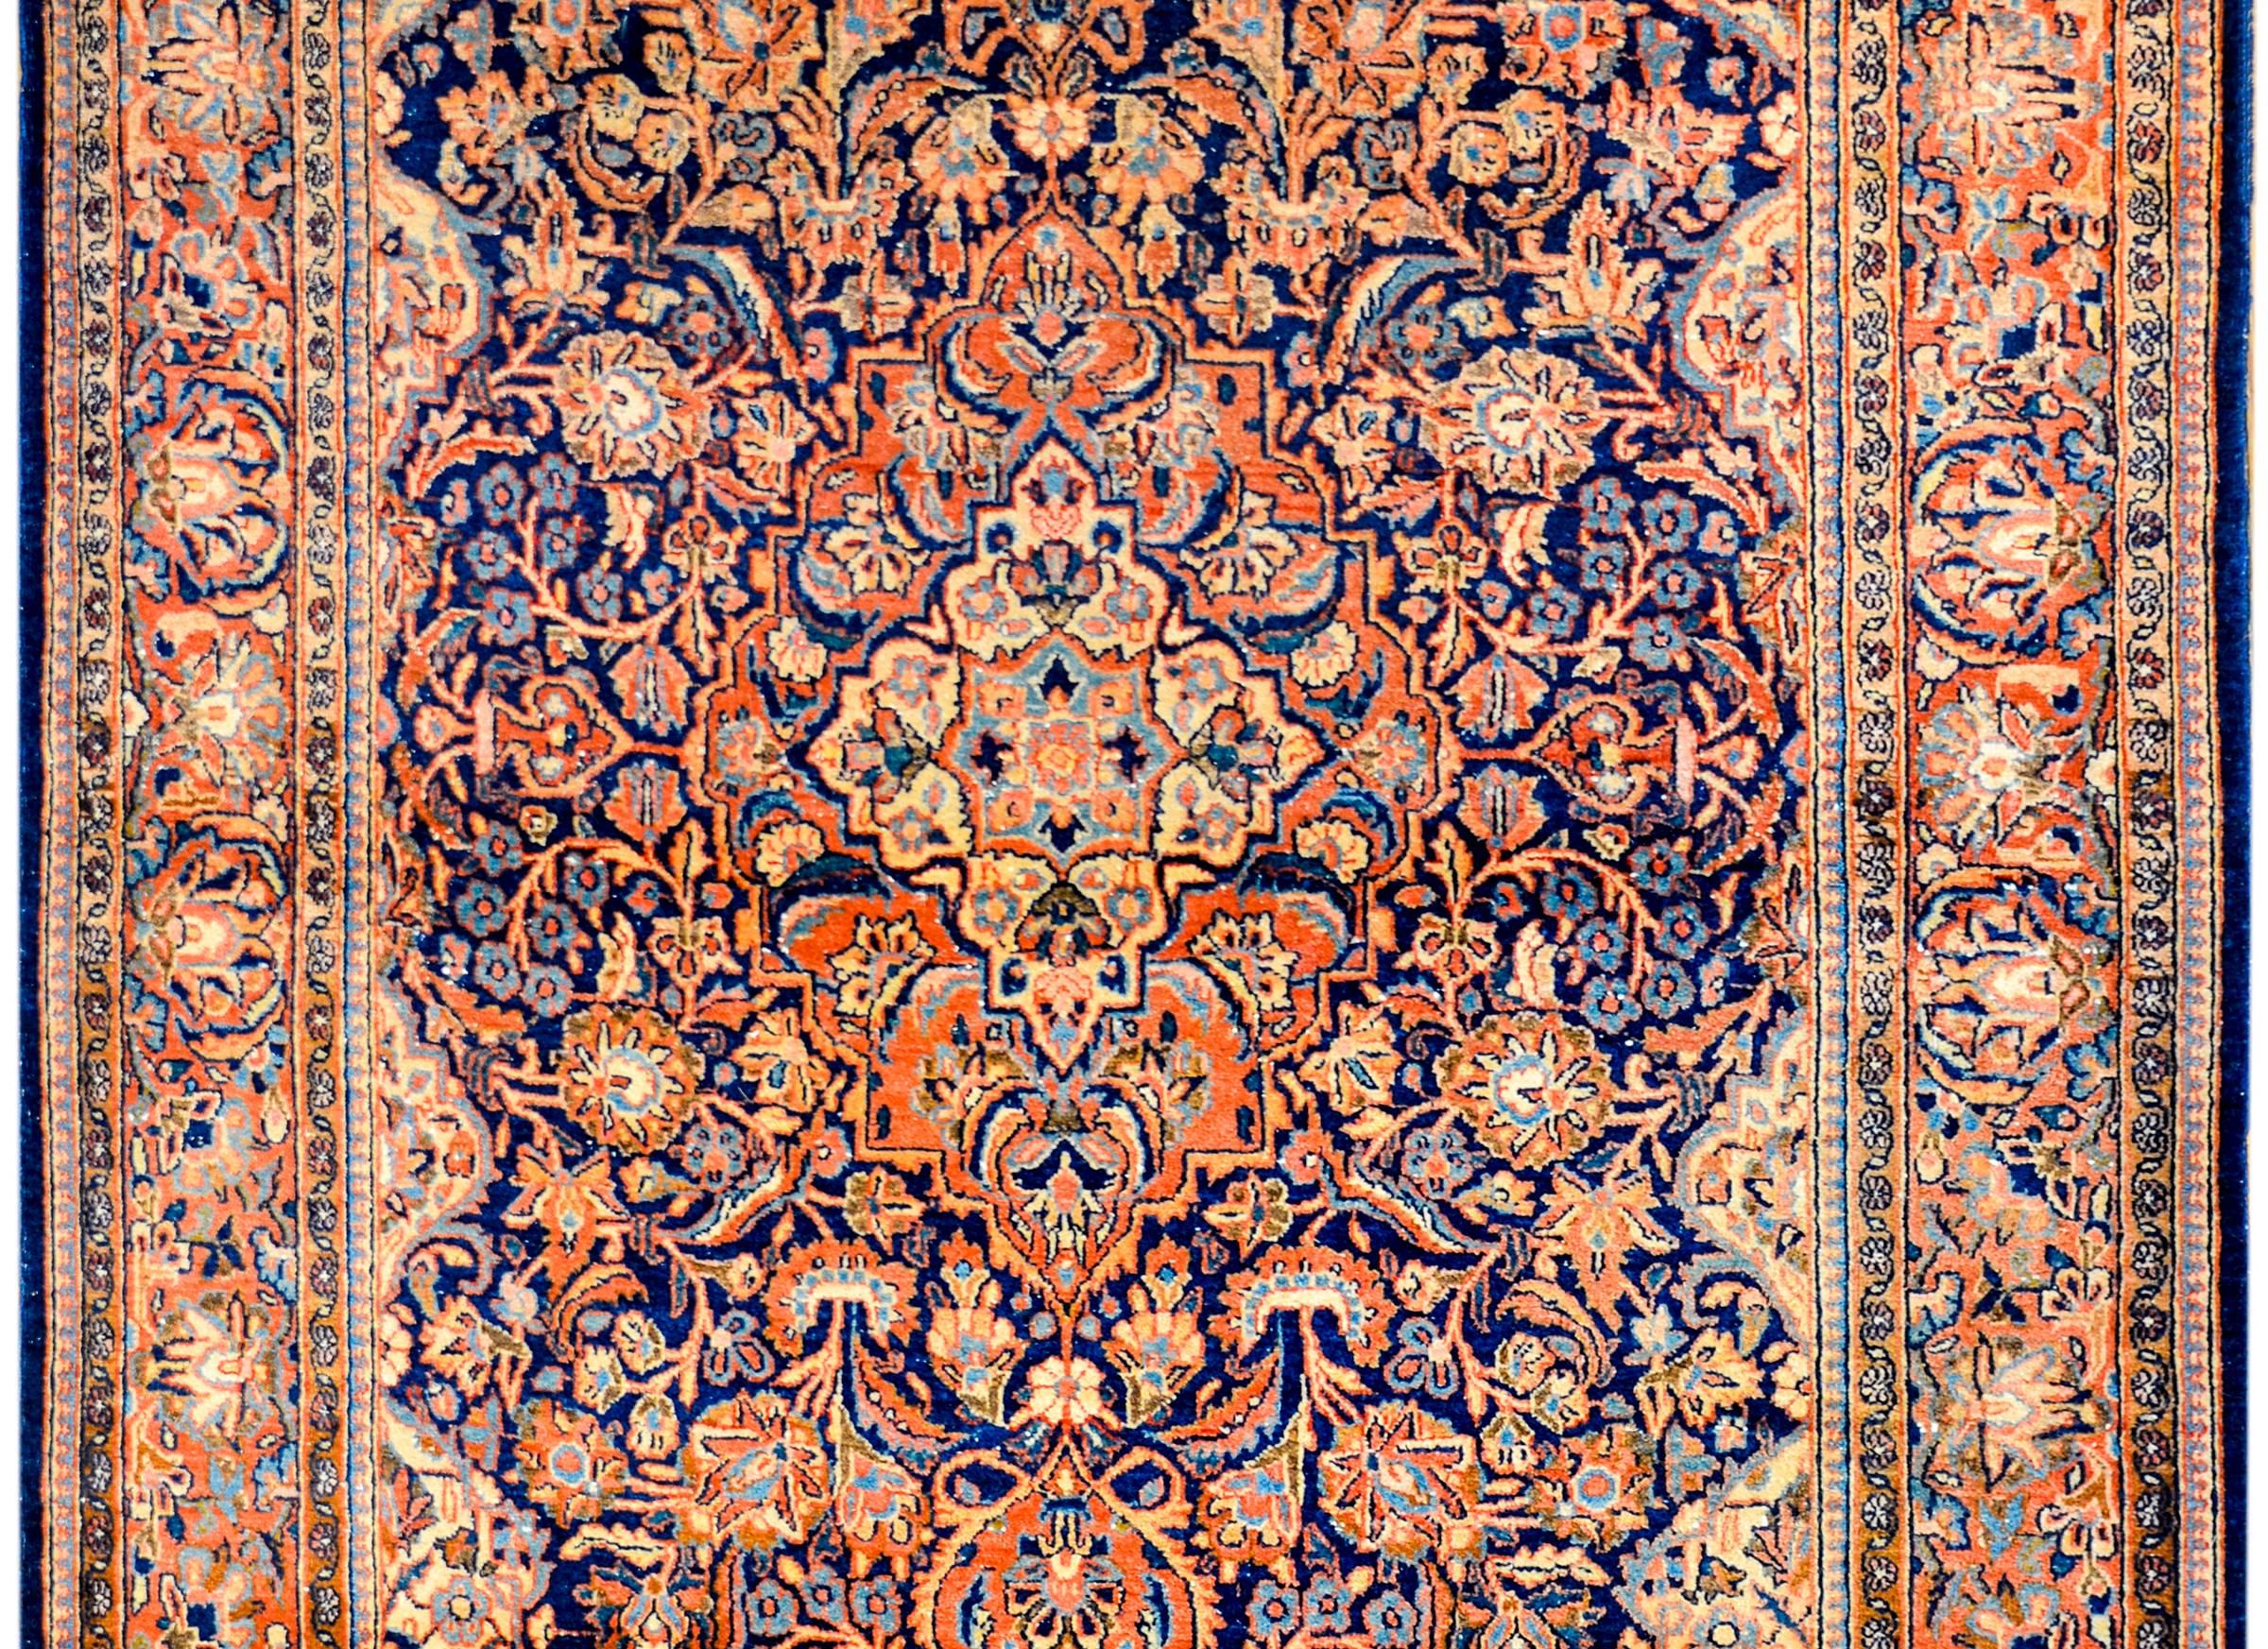 A wonderful early 20th century Persian Kashan rug with a densely woven field and medallion of myriad flowers, leaves, and vines, all woven in orange, indigo, gold, and cream colored vegetable dyed wool. The border is complex and as densely woven as